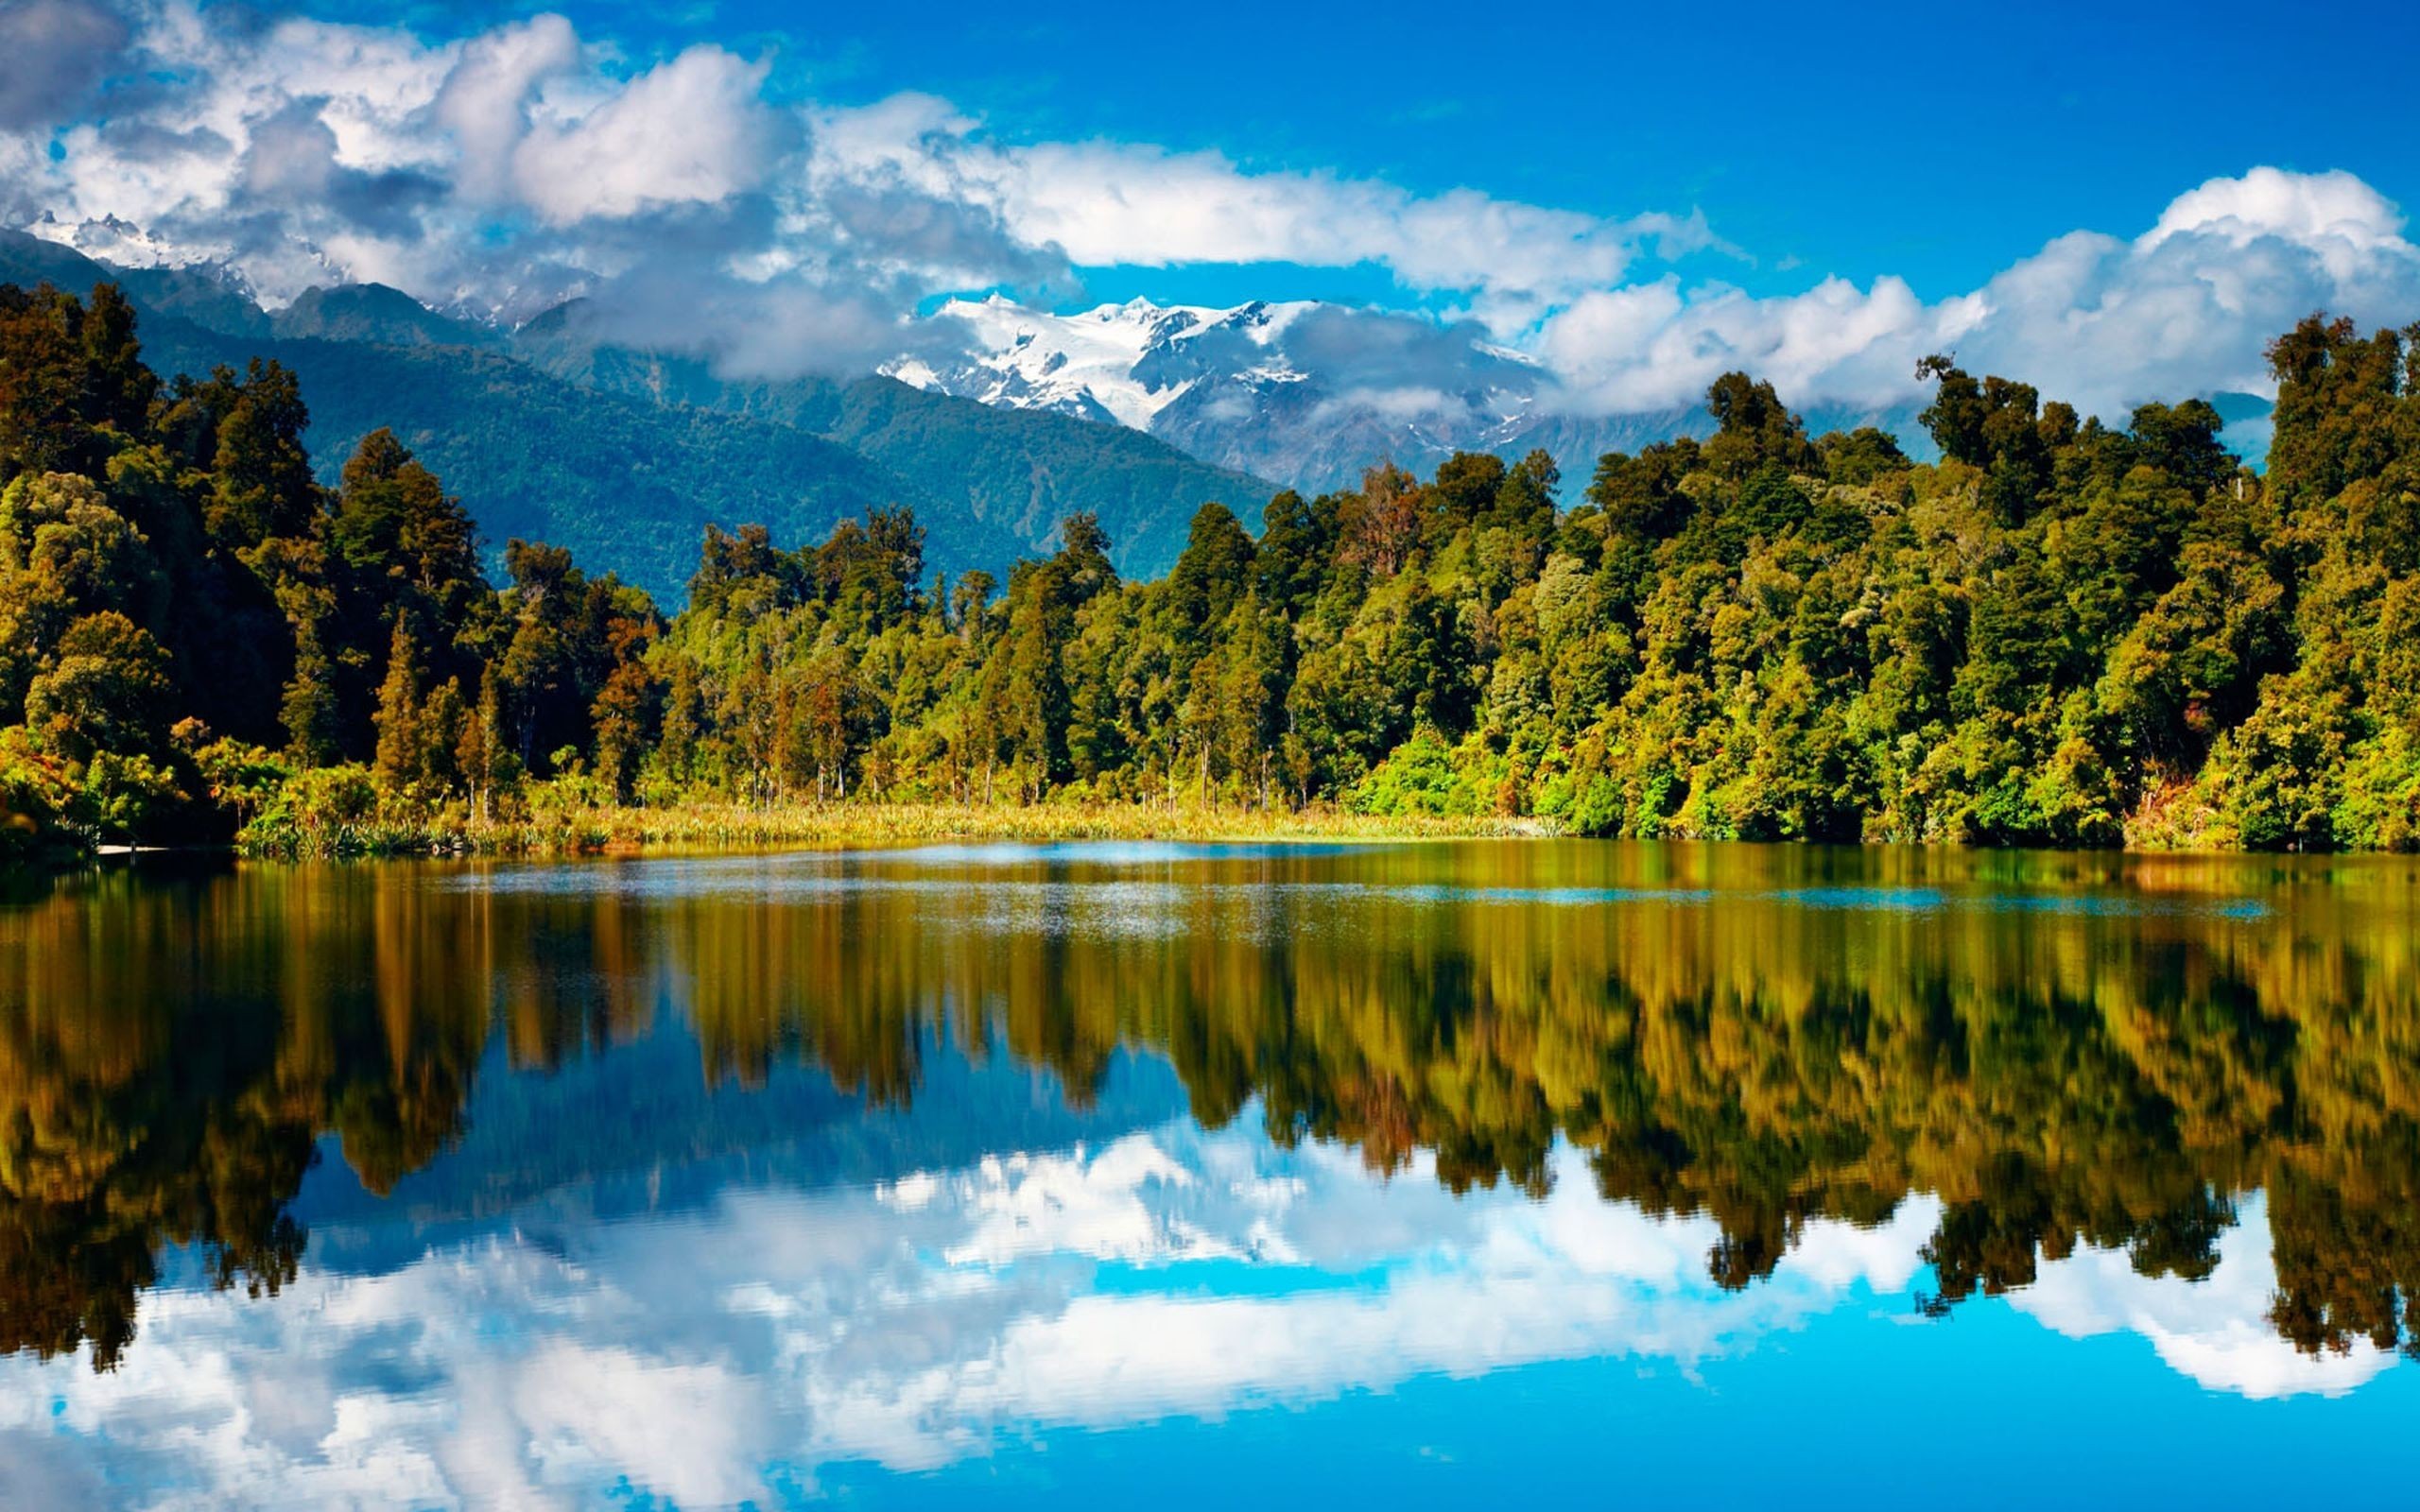 General 2560x1600 landscape mountains lake nature reflection calm waters